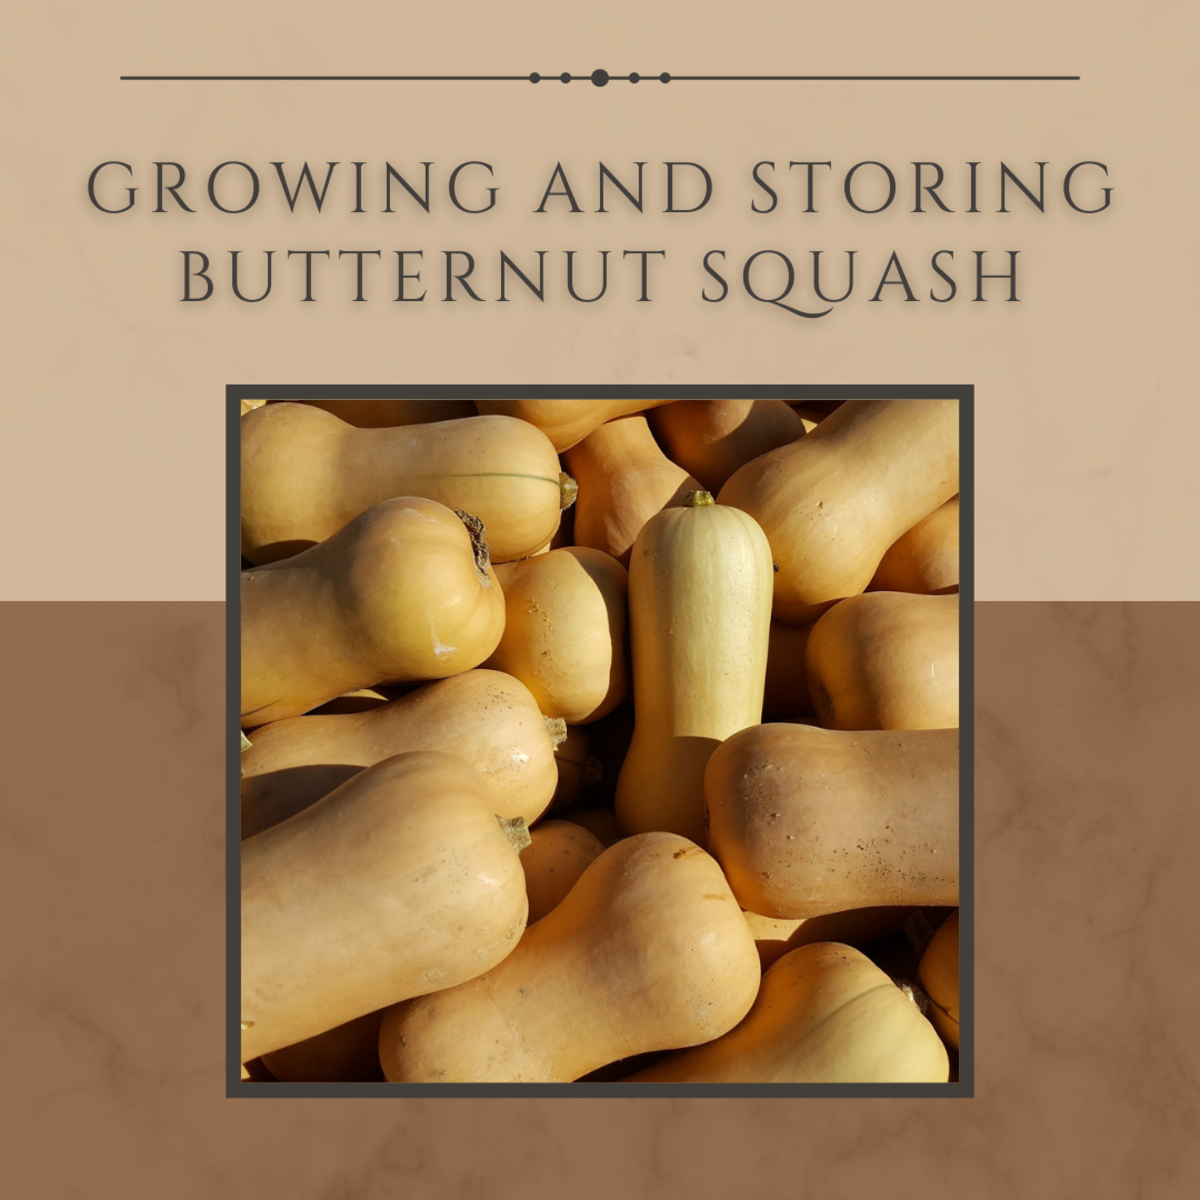 How to Grow and Store Butternut Squash